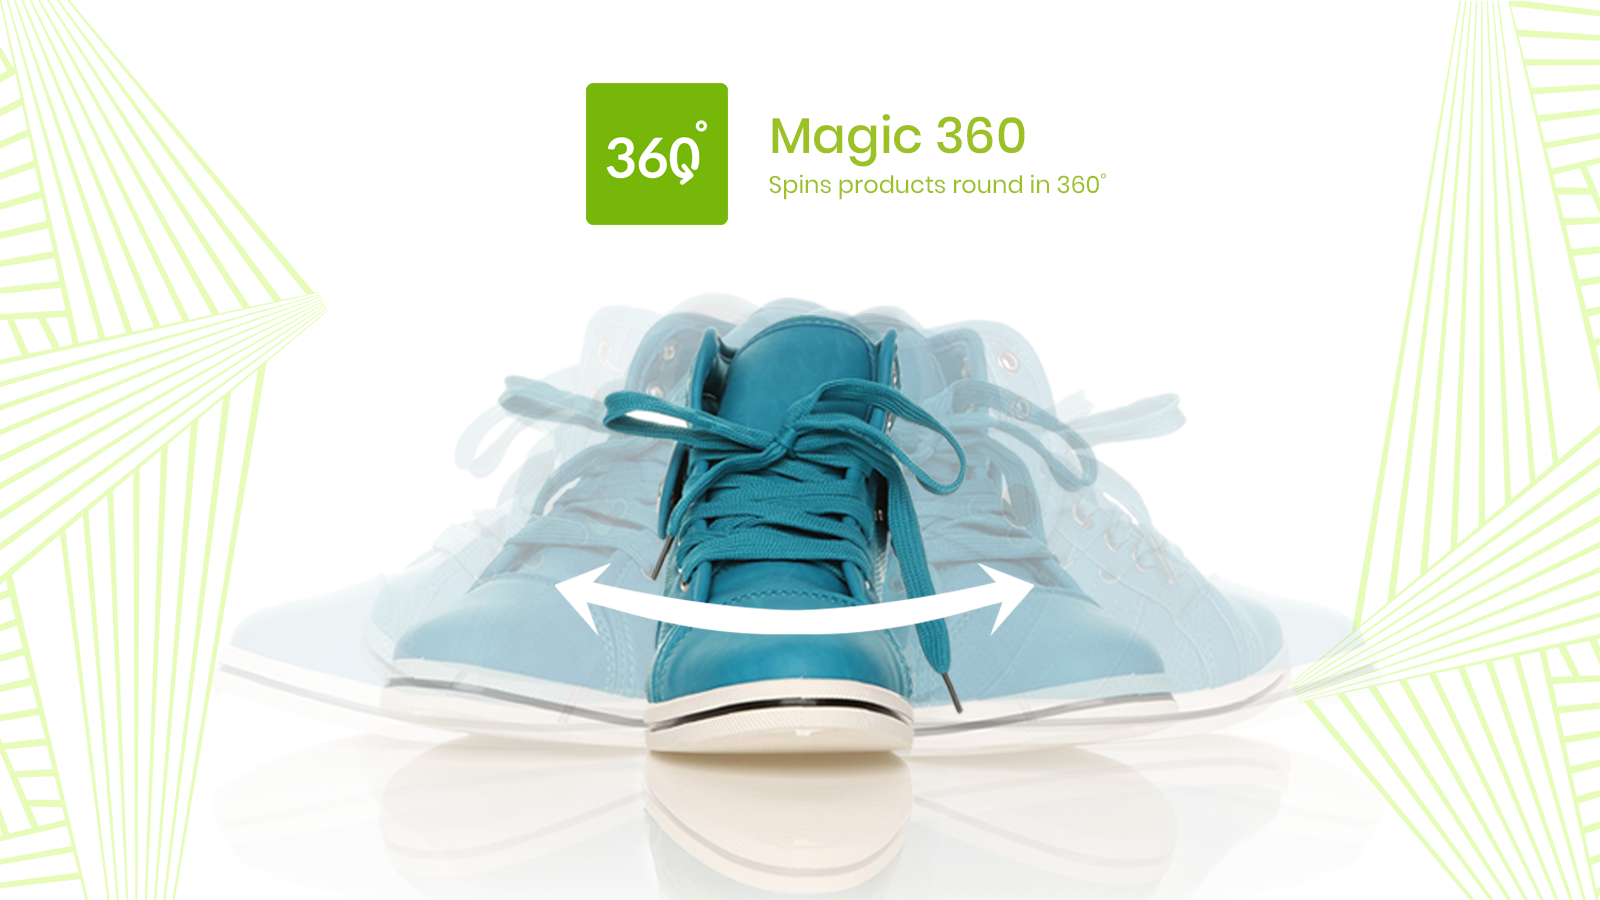 The ultimate 360 product spin